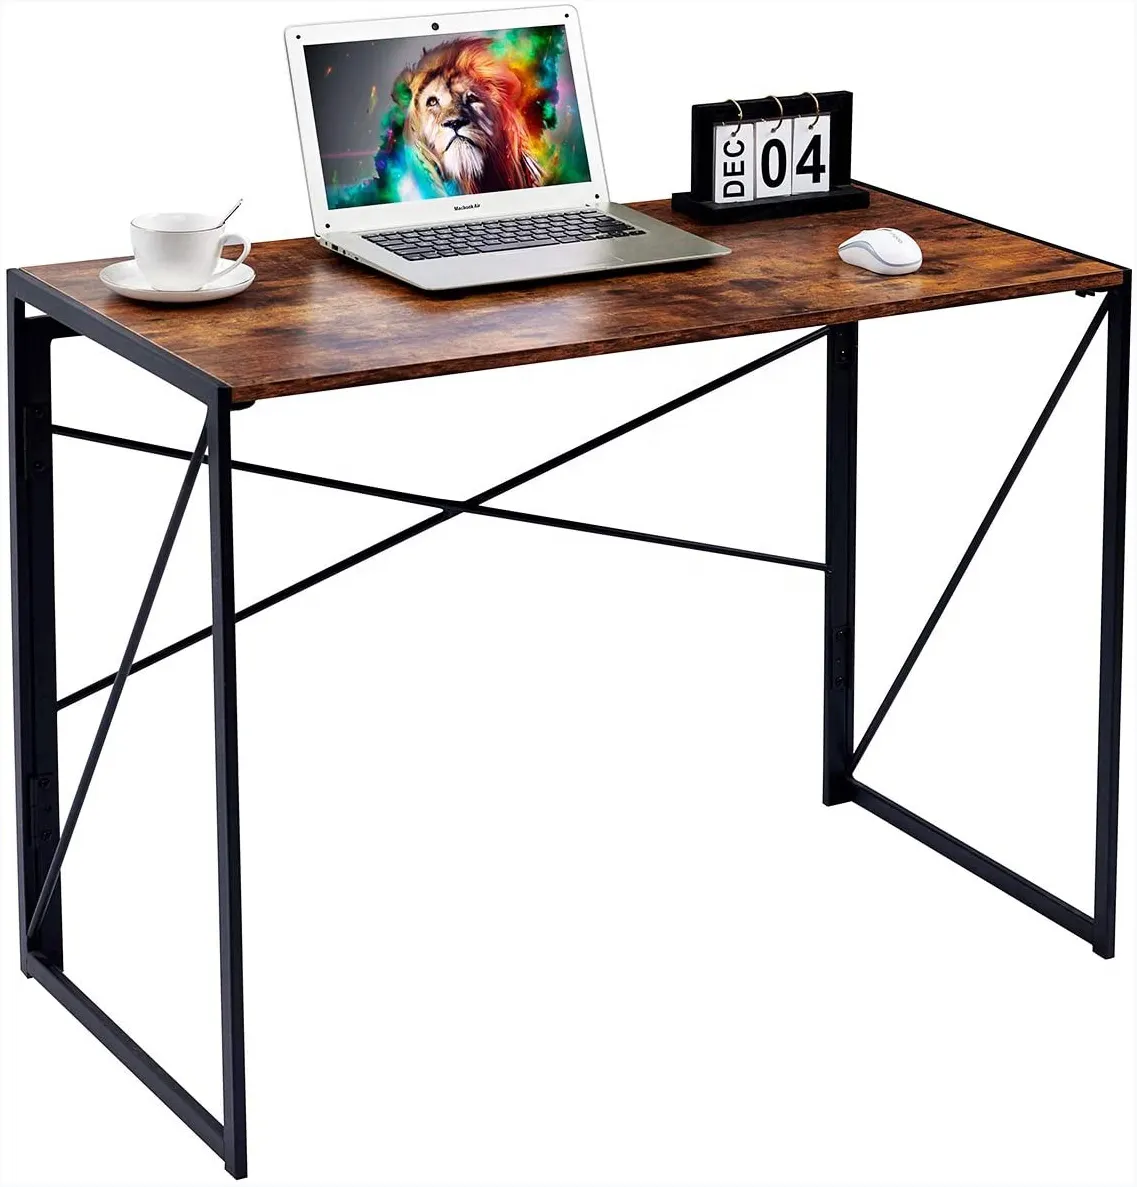 Folding White L Shaped Portable Internet Cafe Glass Stand Foldable Gaming Top Set Wall Computer Desk For home bedroom